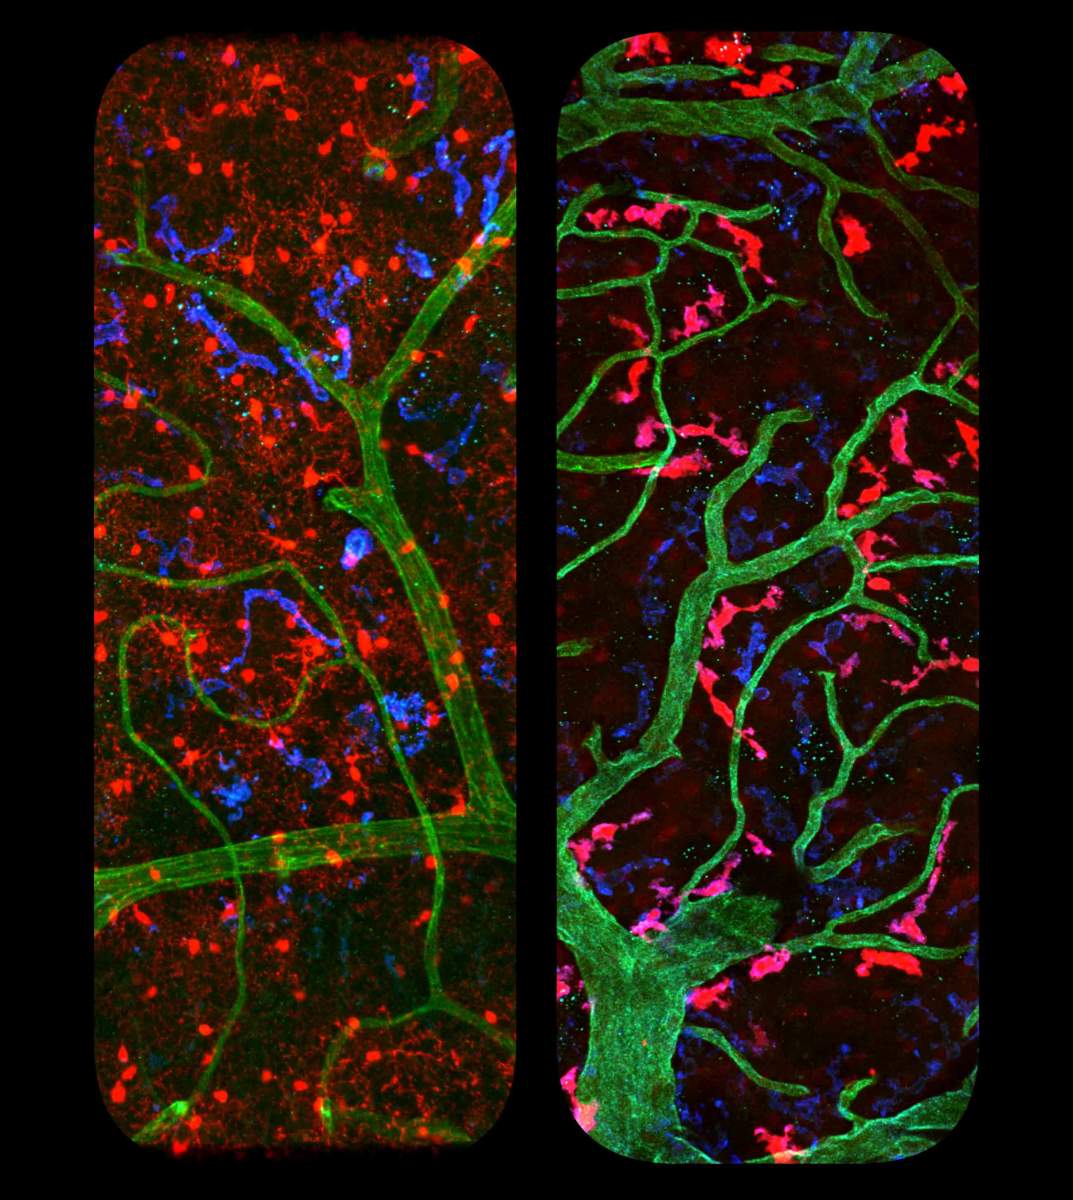 Microglia (left) and perivascular macrophages (right) are each labeled red in separate experiments, revealing their different locations and shapes